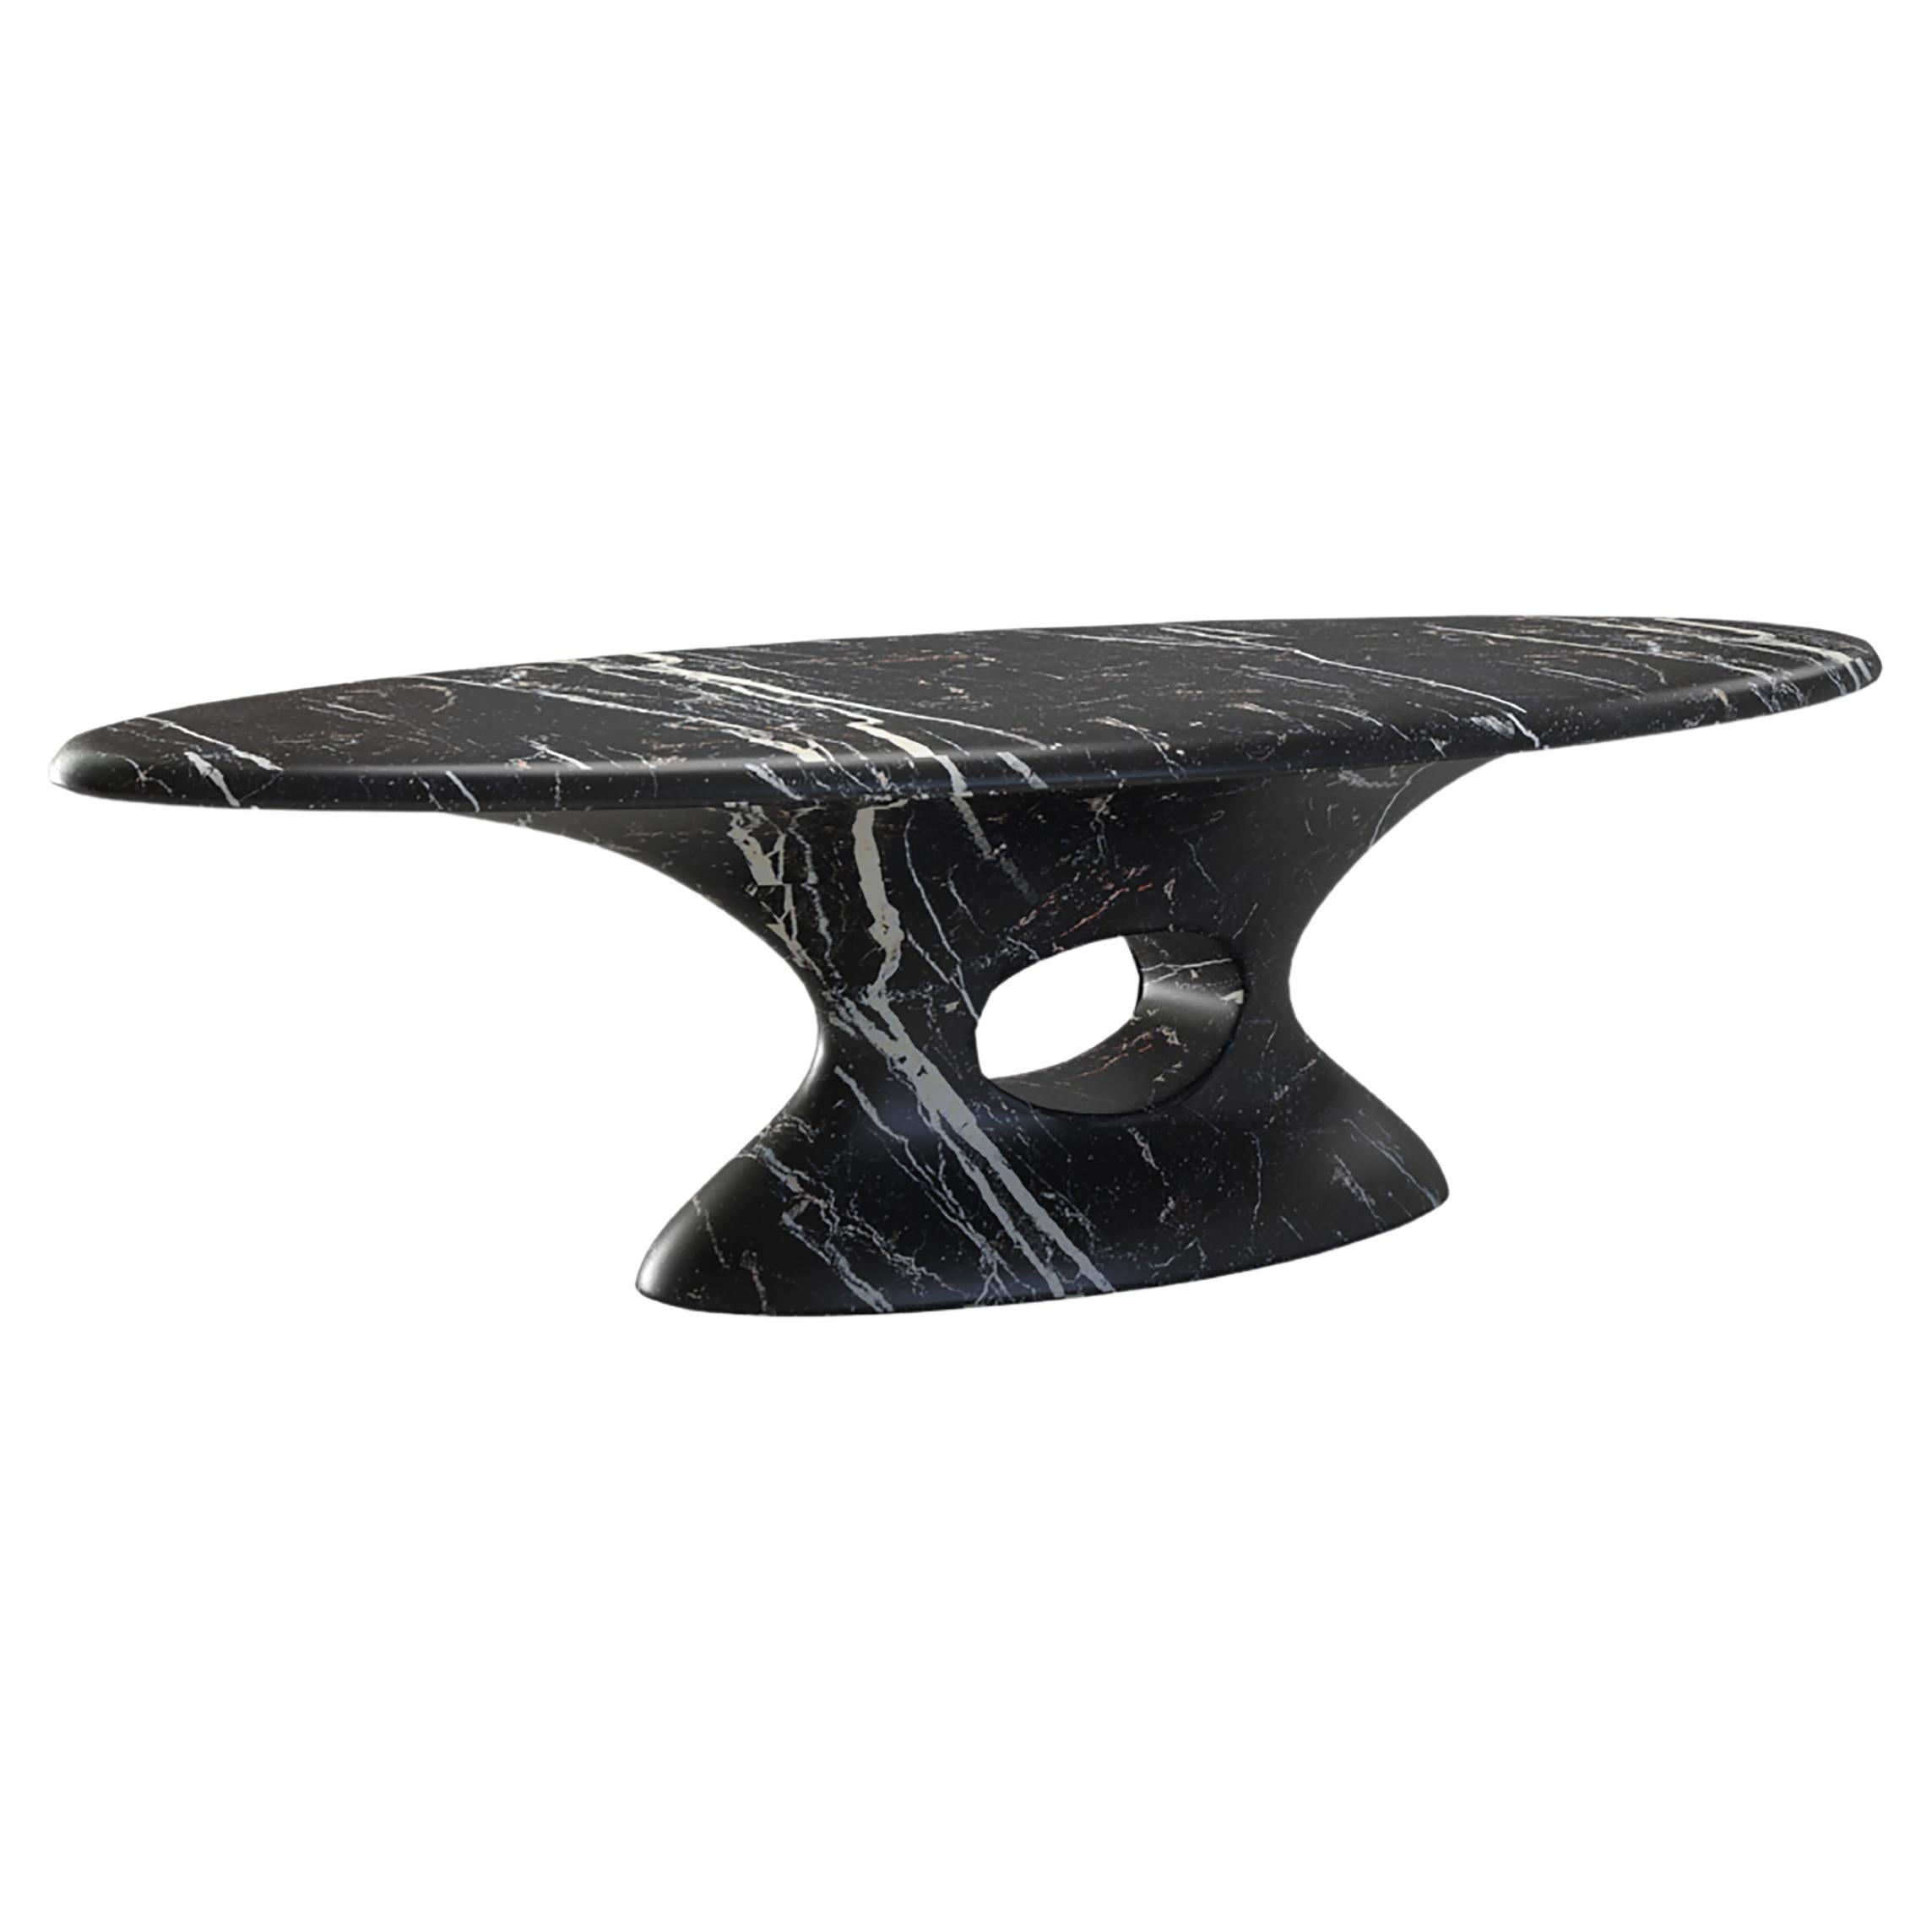 Holy - Oval Marble Italian Sculptural Dining Table, Nero Marquina. 